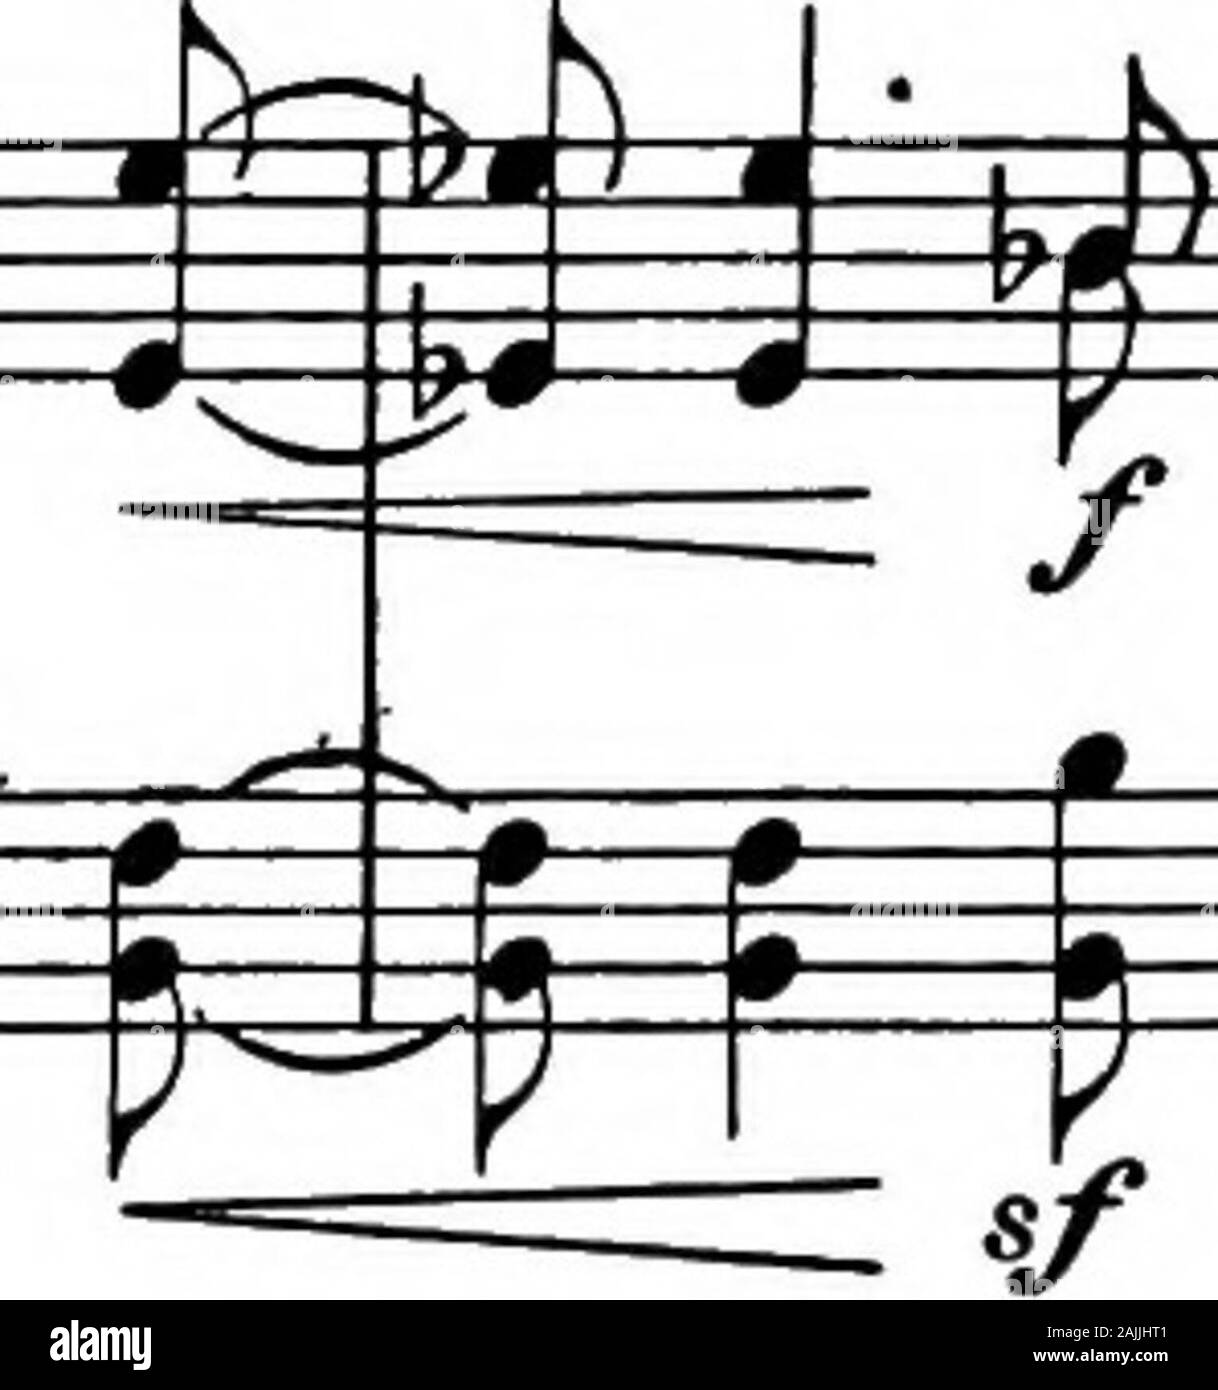 On the performance of Beethoven's symphonies . mf m. The substitution of the lower F and £ flat for the higheris already shewn in the quotation. Page 31, bars 2 and following. Horns, trumpets andkettle-drums play only mf here, and the s/s may then beplayed correspondingly somewhat less sharply. In the third. and fourth horns the mezzoforte begins already on the pre-ceding up-beat (octave G). The second horn takes the lower£flats during four bars. In the 2* bar of page 32, whenthe violins make their powerful leap from the low D to the 140 NINTH SYMPHONY. high E^ the first and second horns first Stock Photo